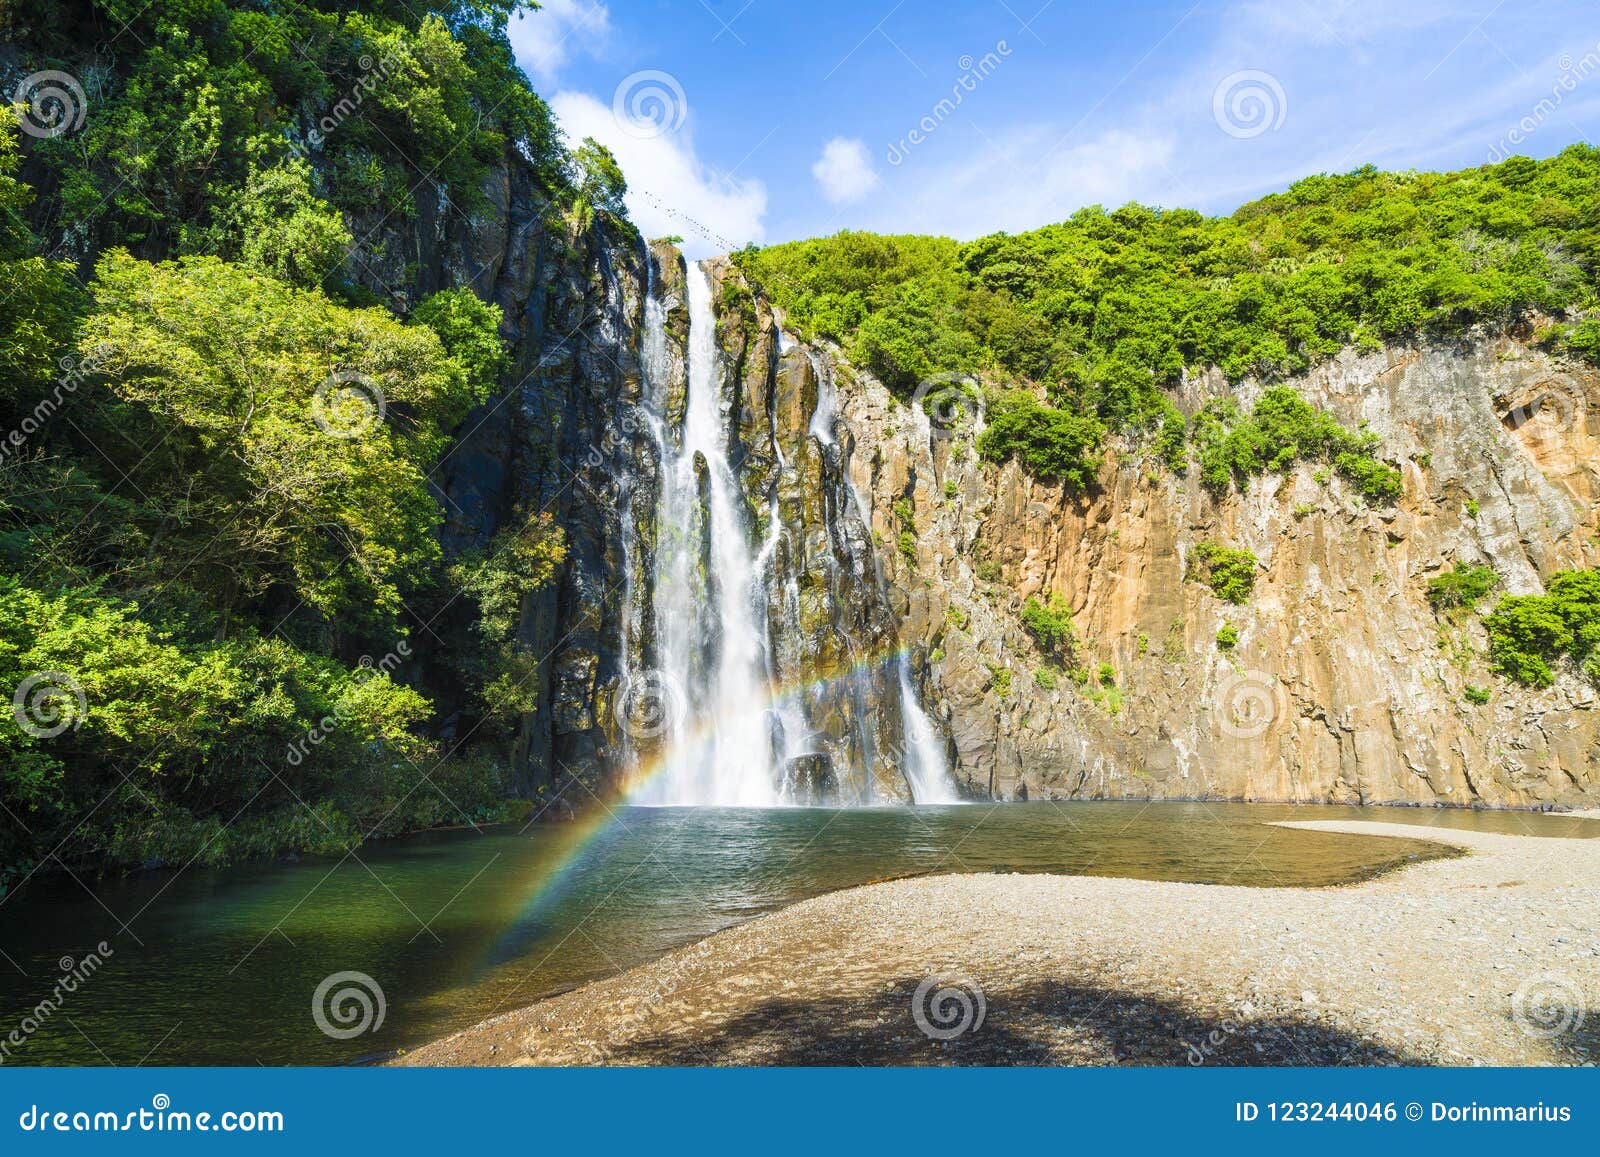 the waterfalls of niagara cascade situated in north of la reunion island